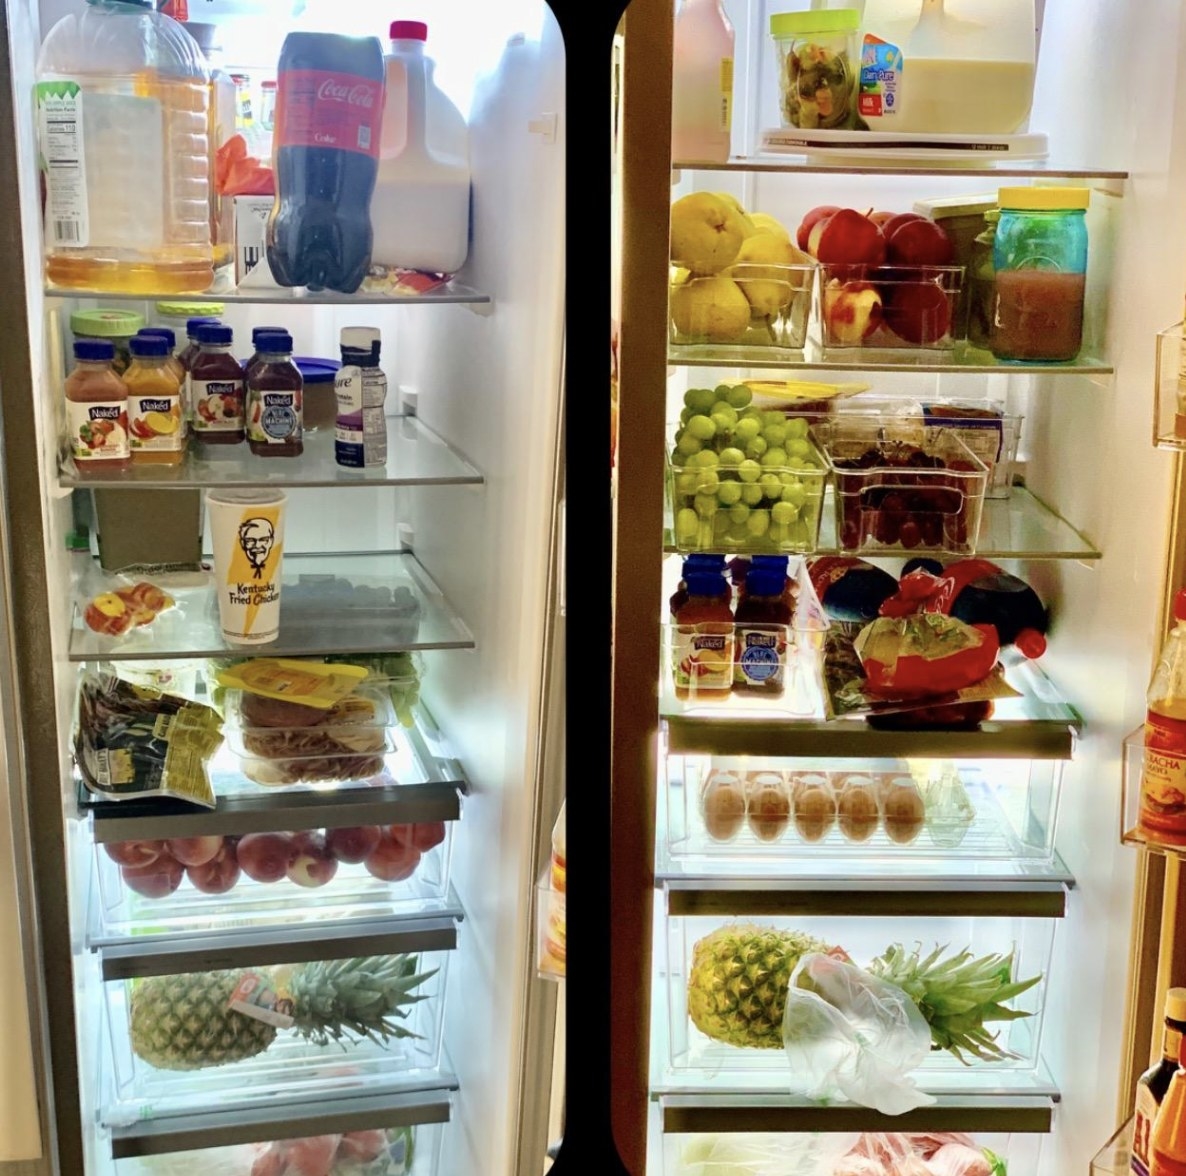 a before and after of a messy fridge before using the bins, and an organized fridge after using the bins